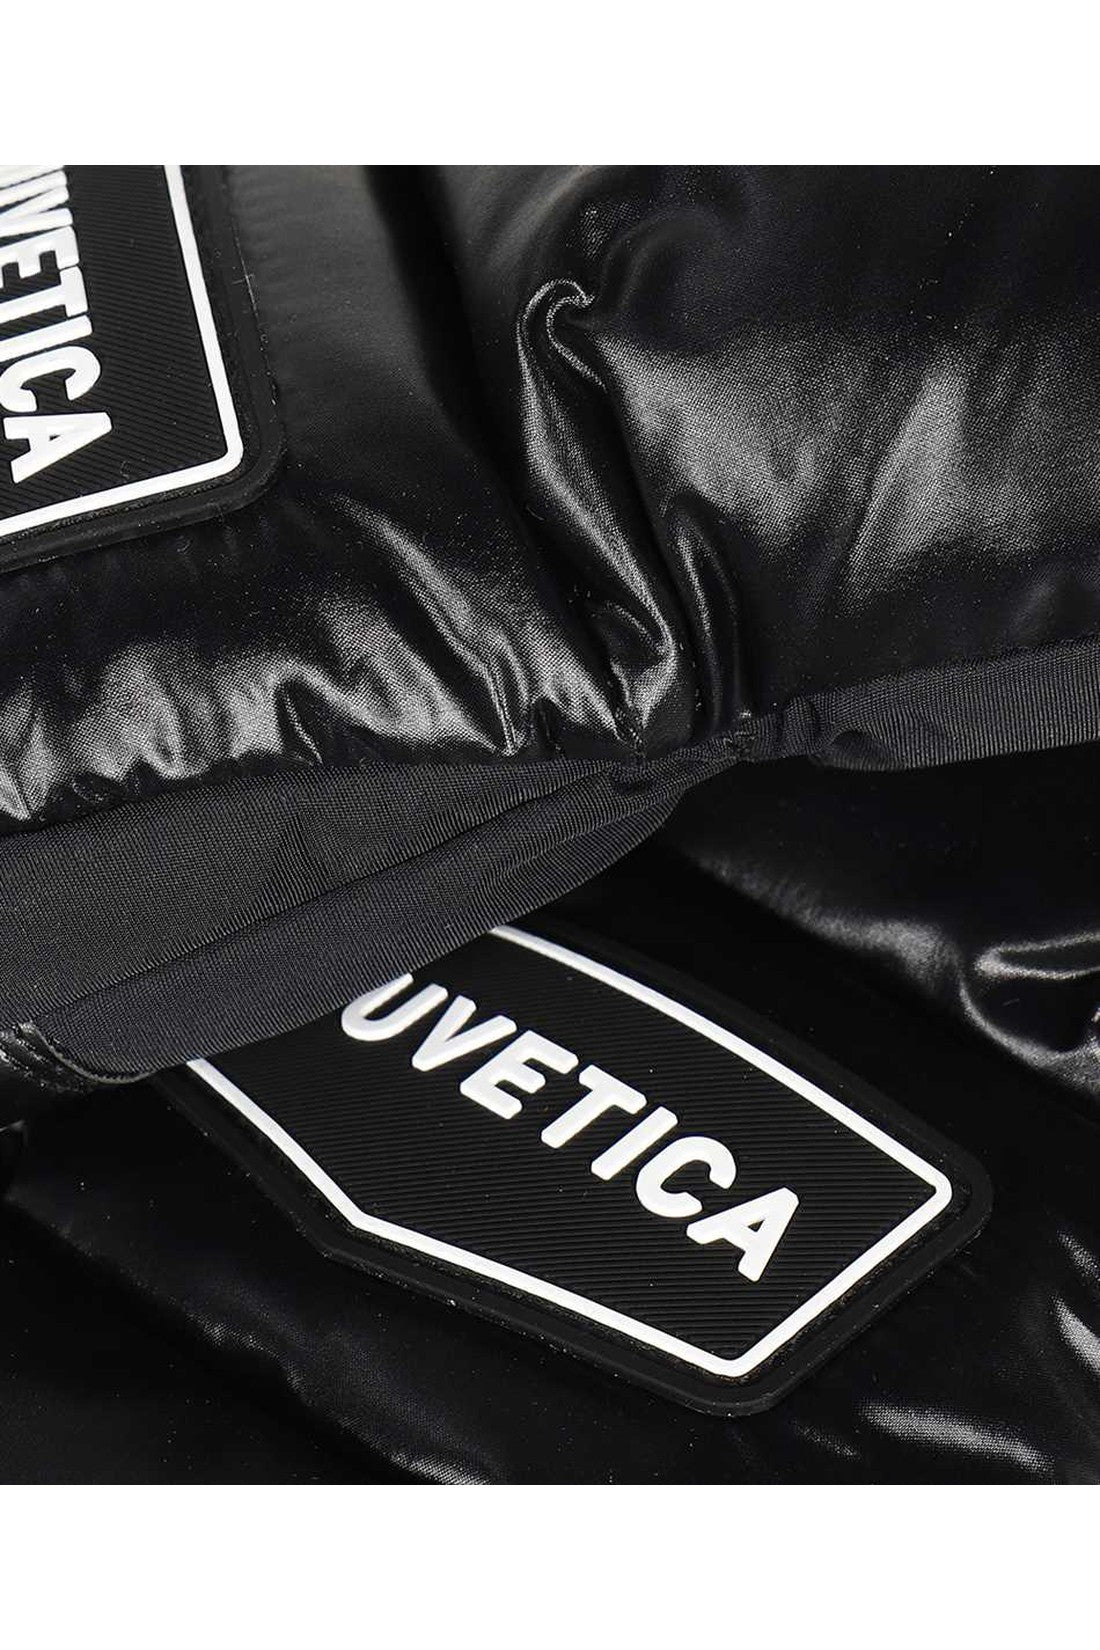 Duvetica-OUTLET-SALE-Gloves-Handschuhe-M-ARCHIVE-COLLECTION-2.jpg